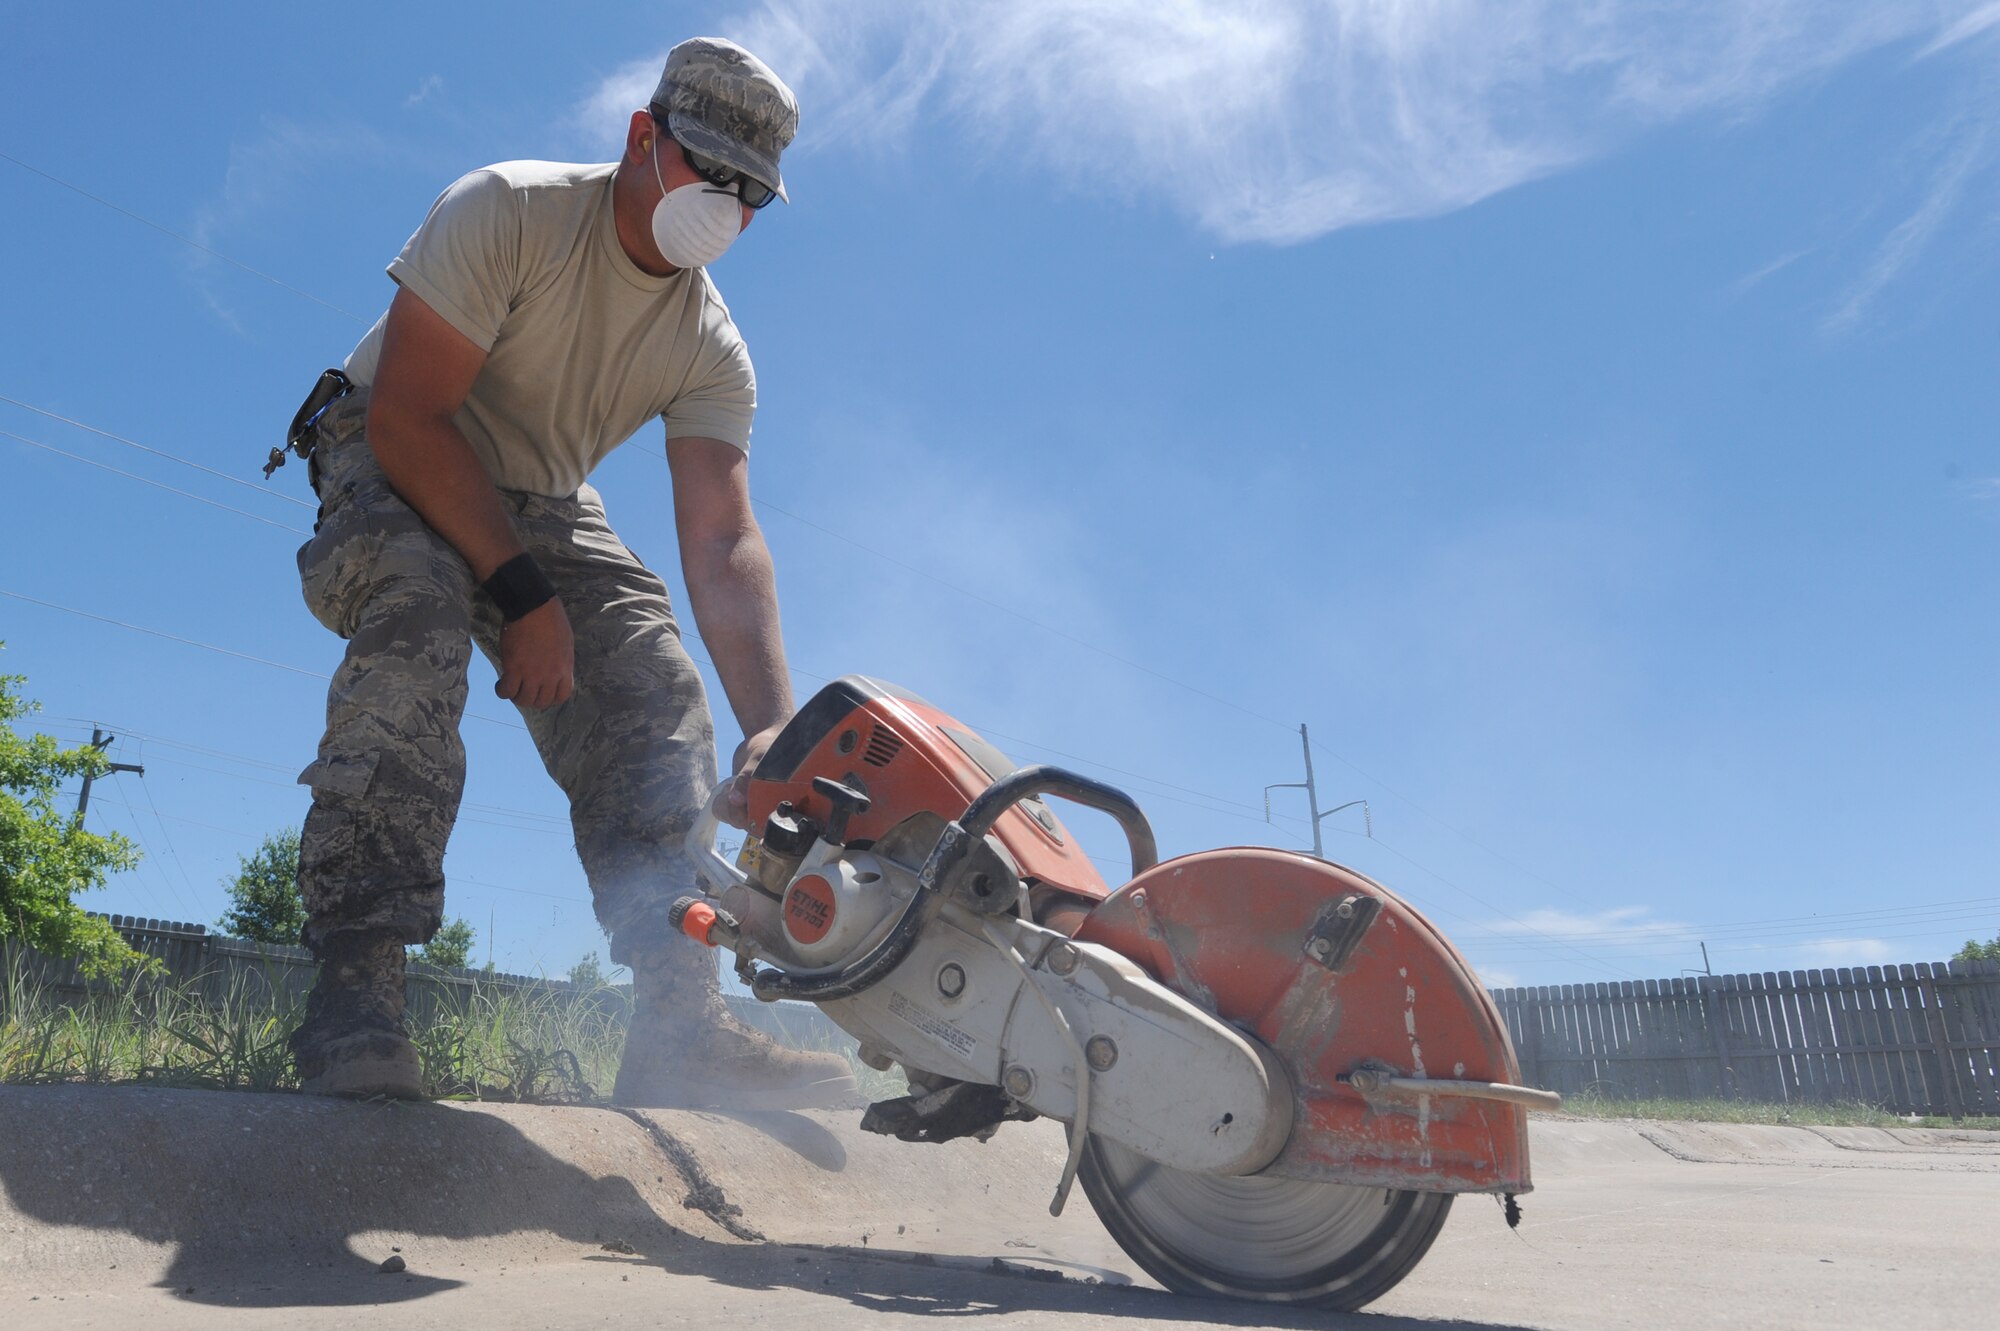 WHITEMAN AIR FORCE BASE, Mo. - Senior Airman Travis Knighten, 509th Civil Engineer Squadron payment and equipment operator, grinds out tar sealant from the crevices of a parking lot, Tuesday. Repairing the sealant protects the concrete from weather and helps prevent cracking.(U.S. Air Force photo/ Senior Airman Carlin Leslie)
 